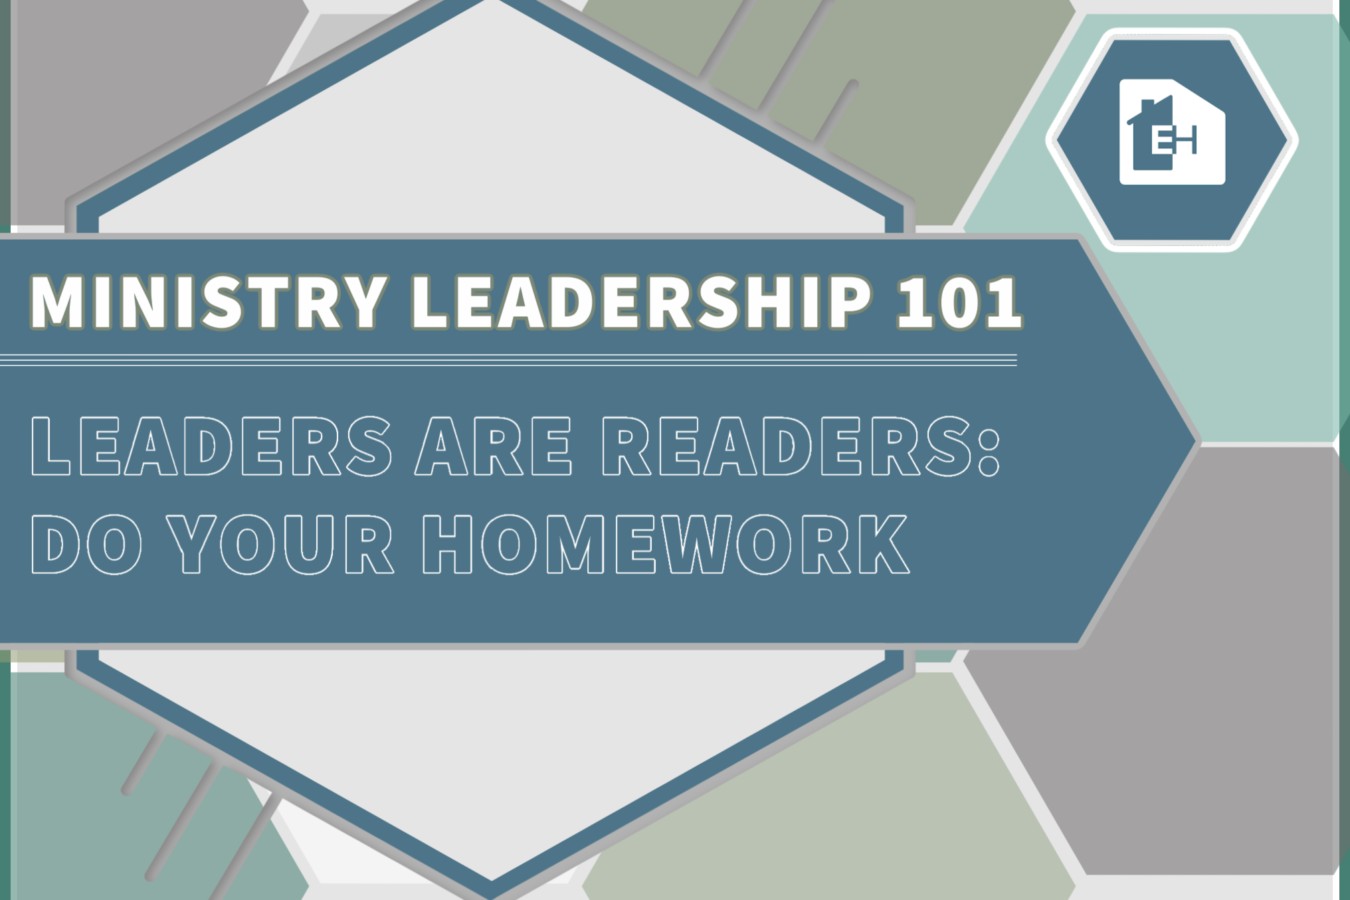 Leaders Are Readers: Do Your Homework